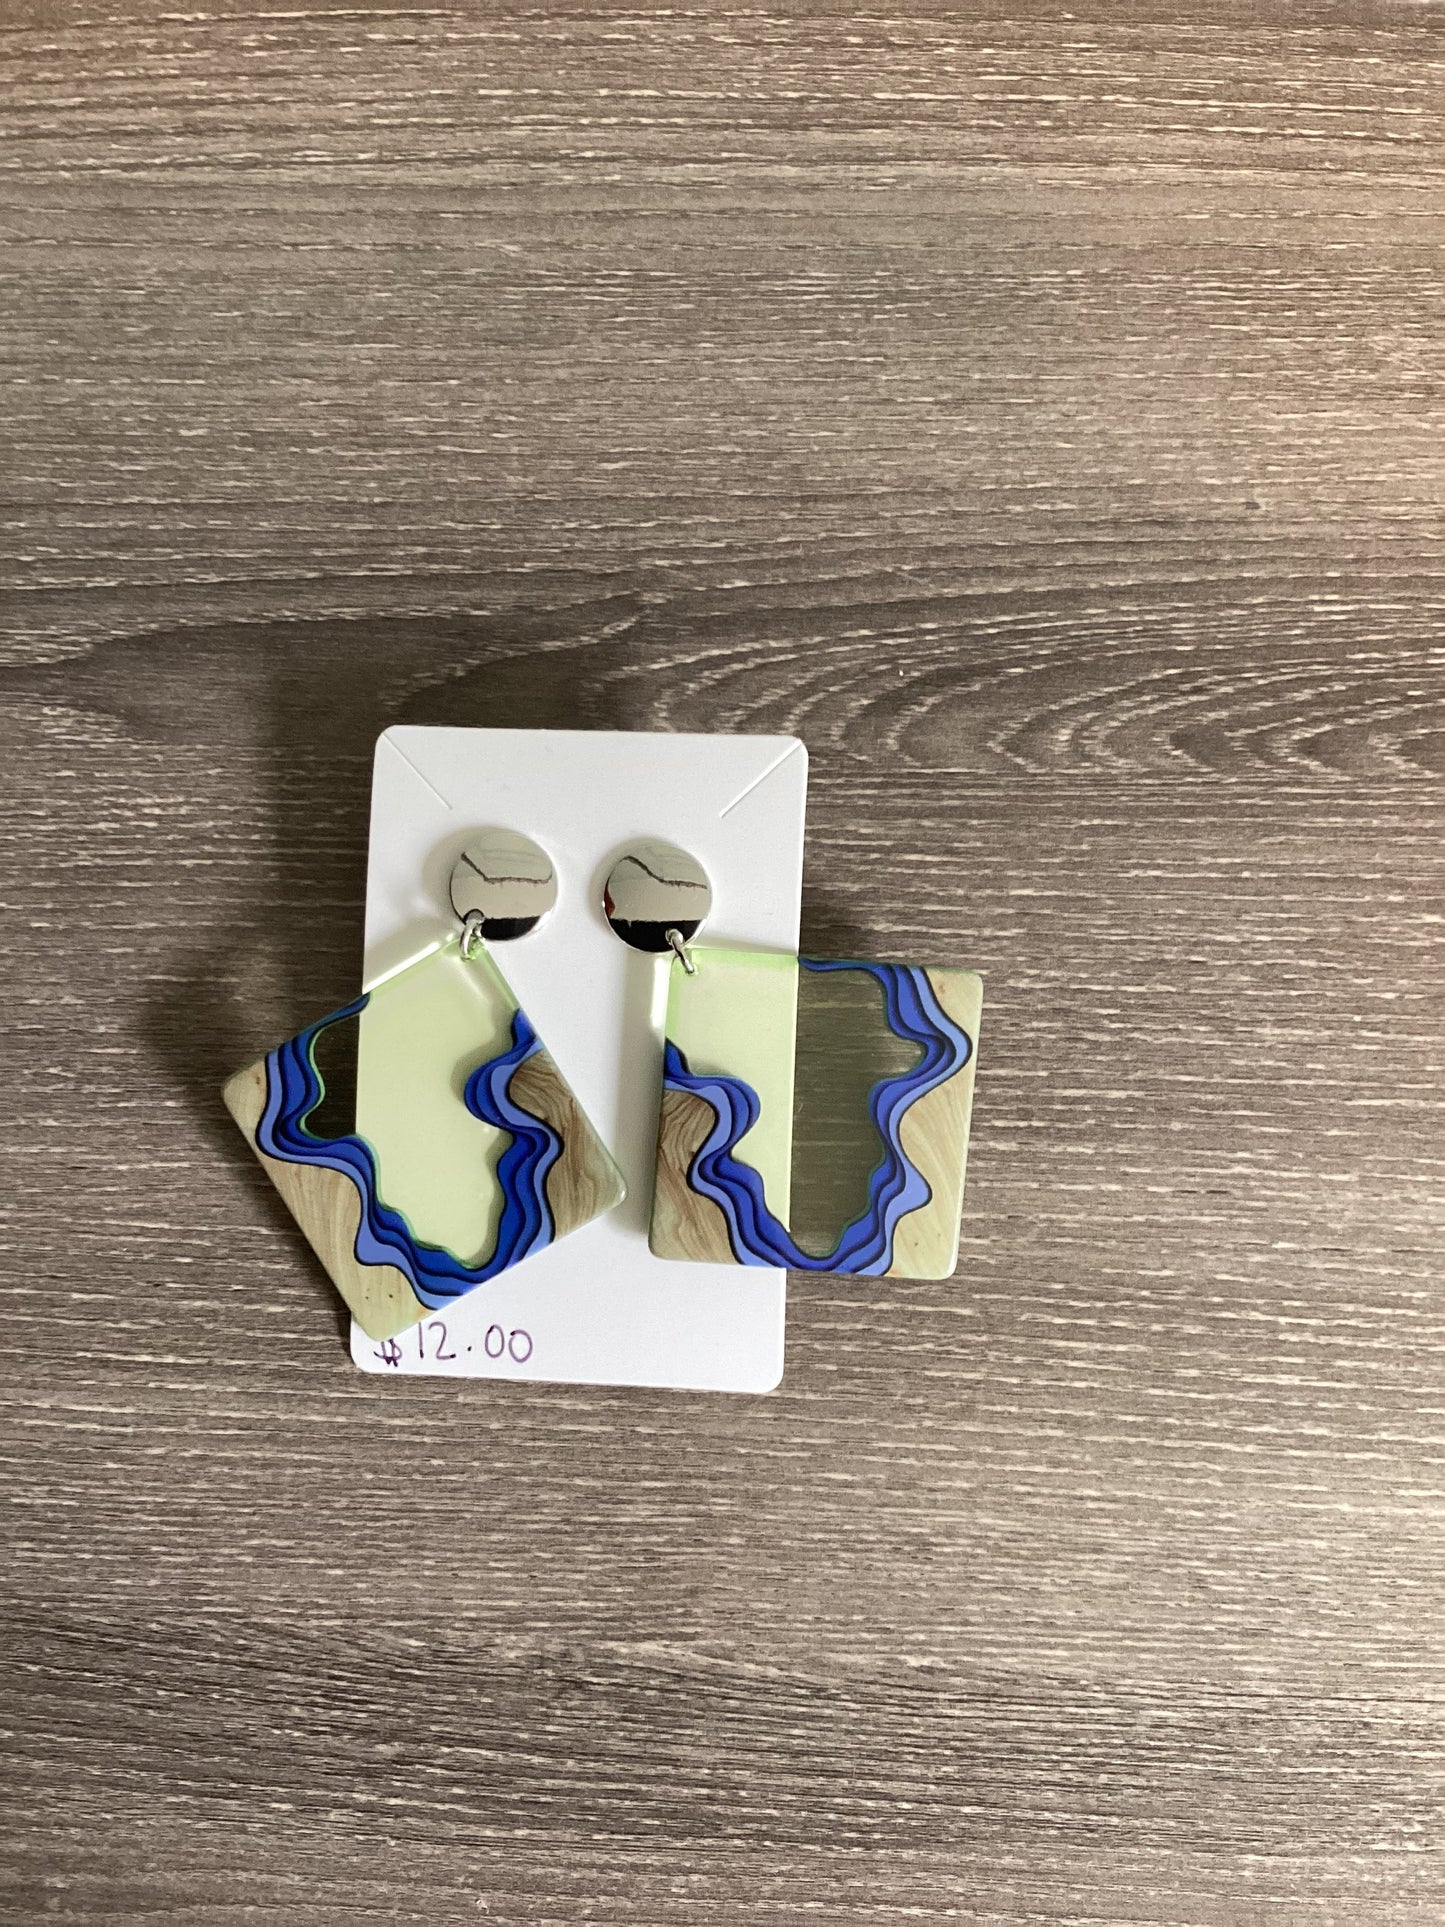 Blue Abstract Earrings